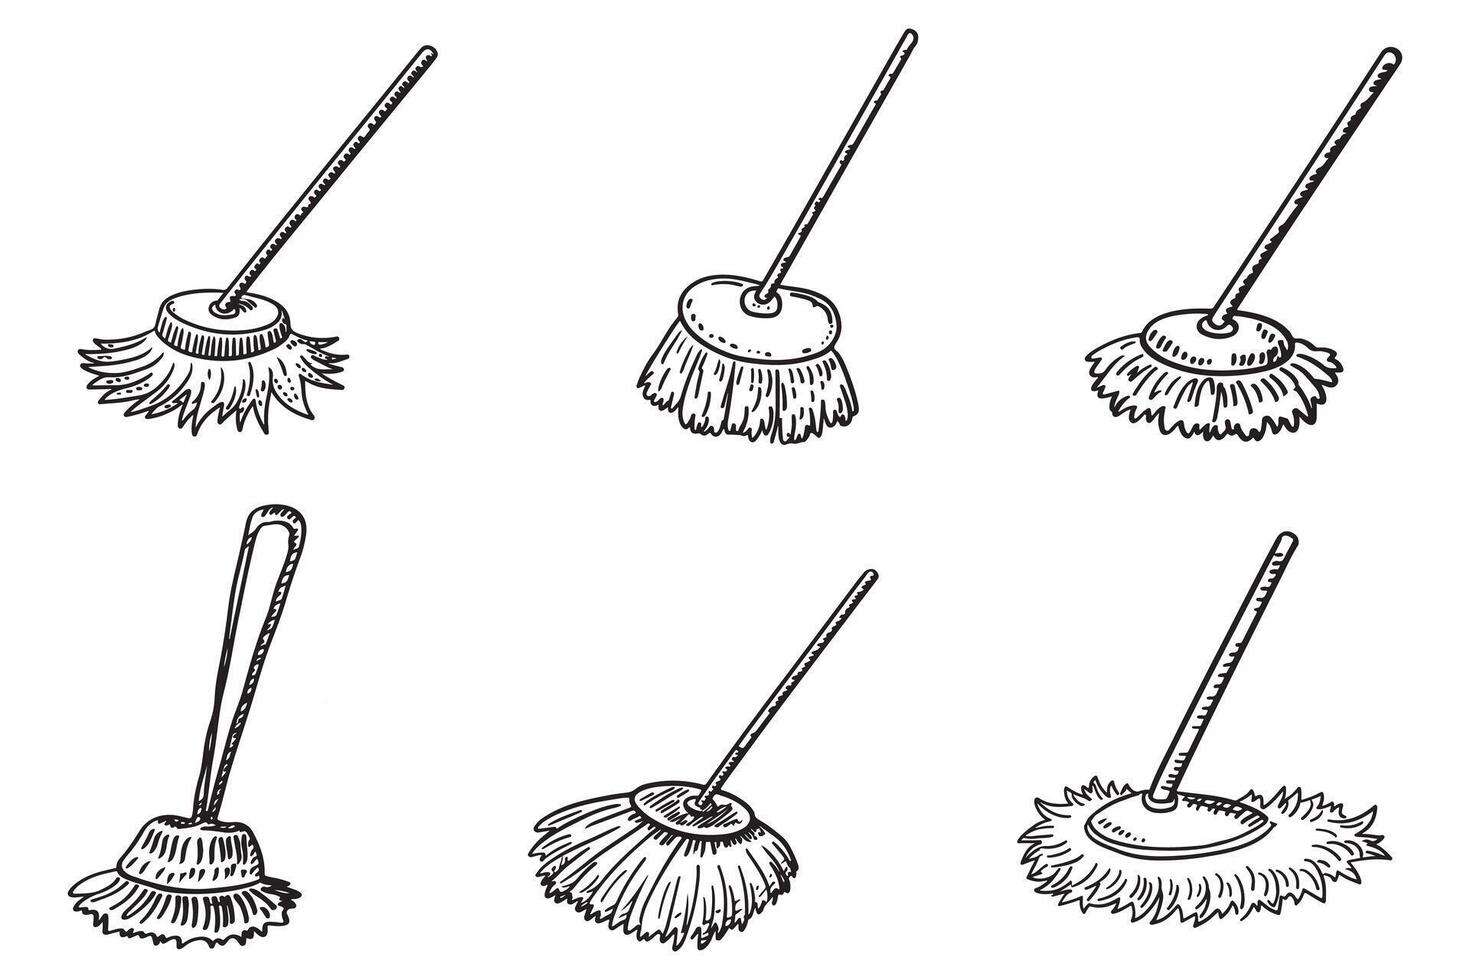 Old Fashioned Mop icon Set Vector Design On White Background illustration